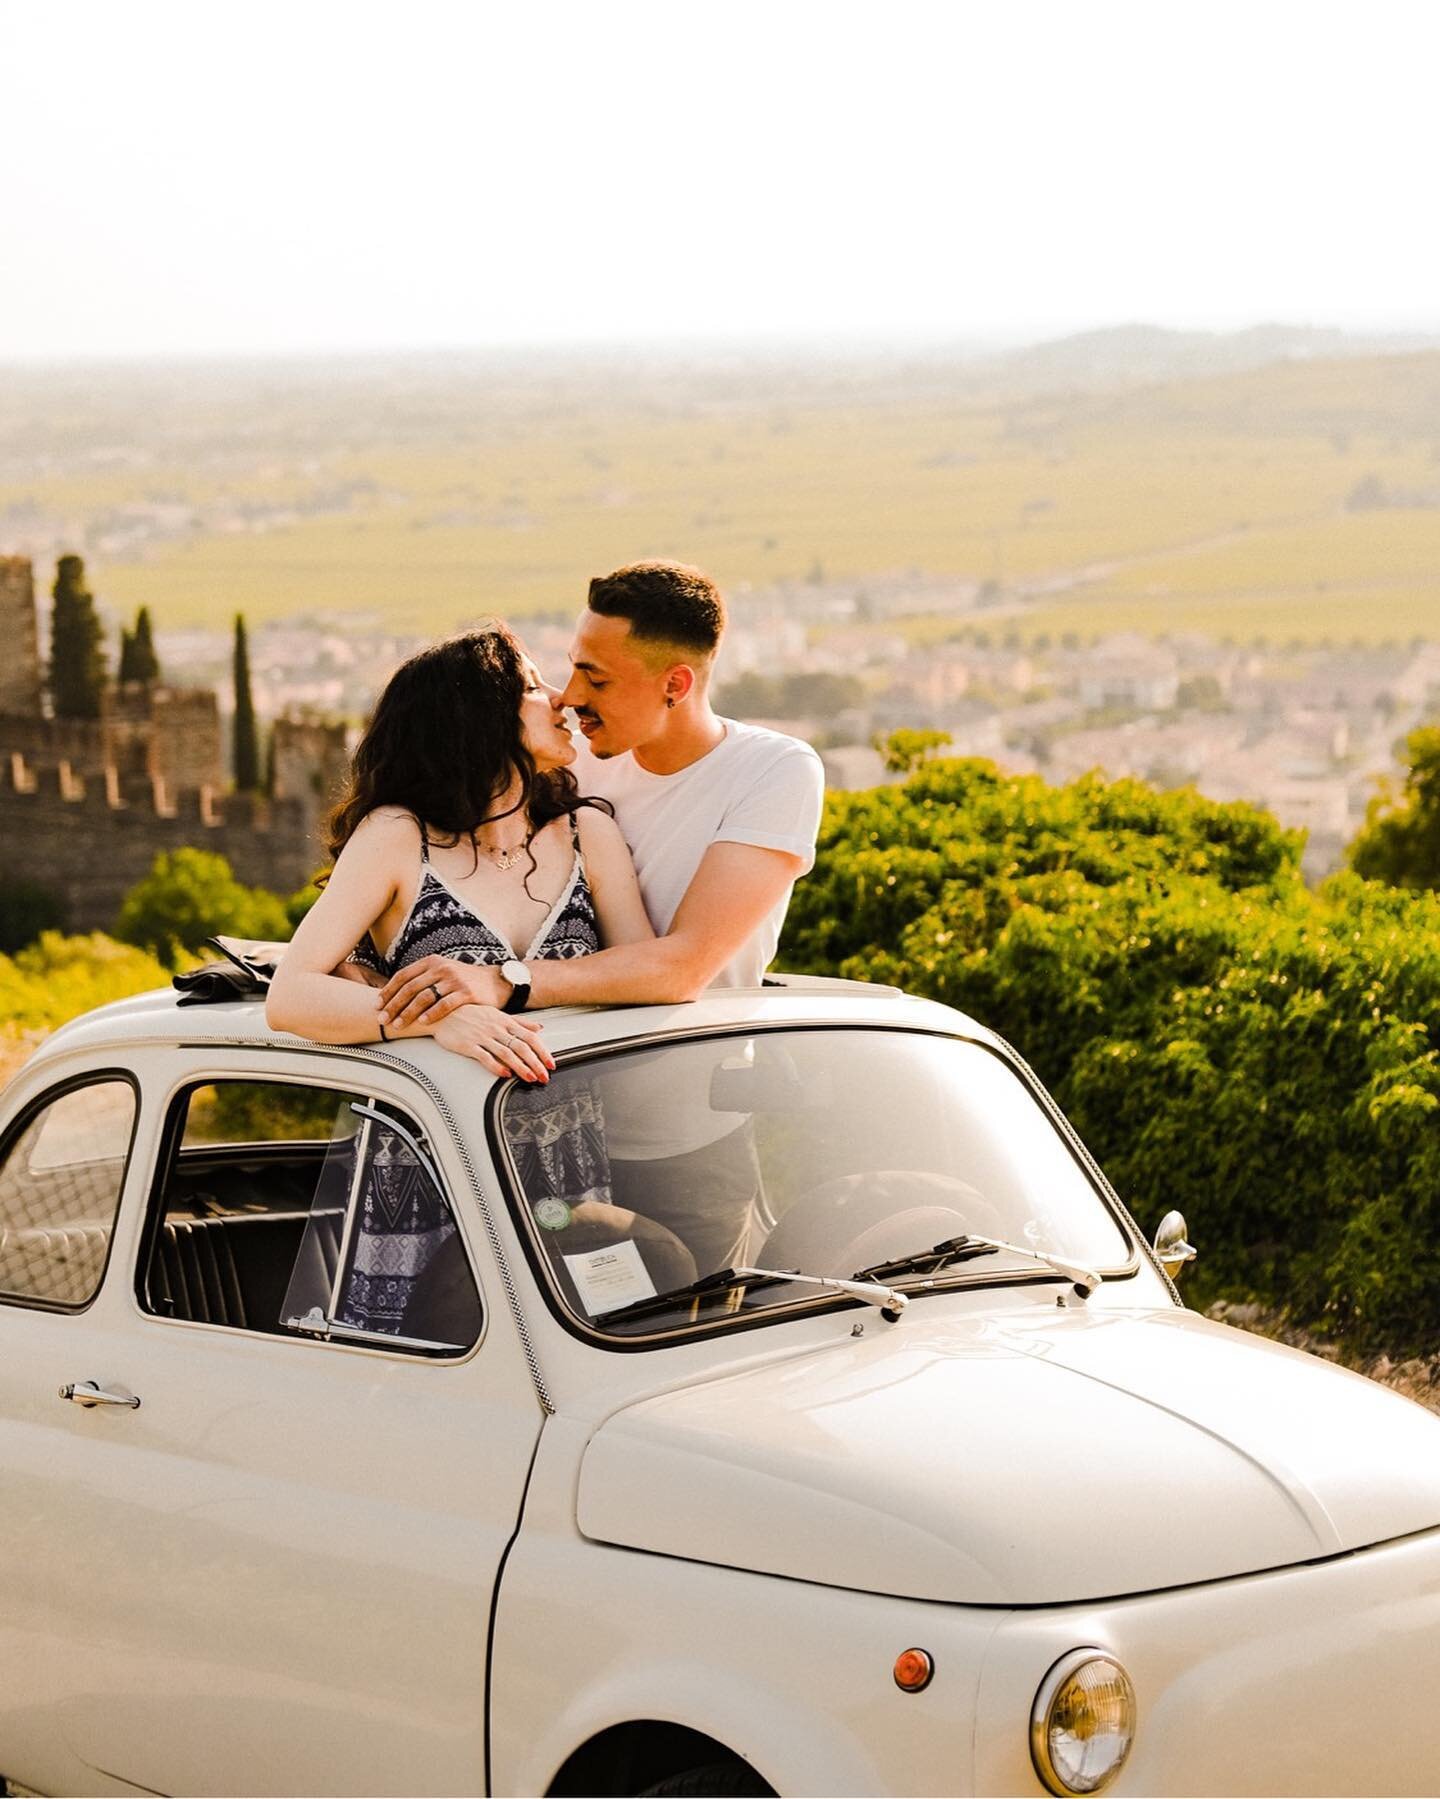 With a vintage touch ✨
.
.
.
#photography #couplegoals #deatinationphotography #autenticlovemag #muchlove #proposalideas #fiat500